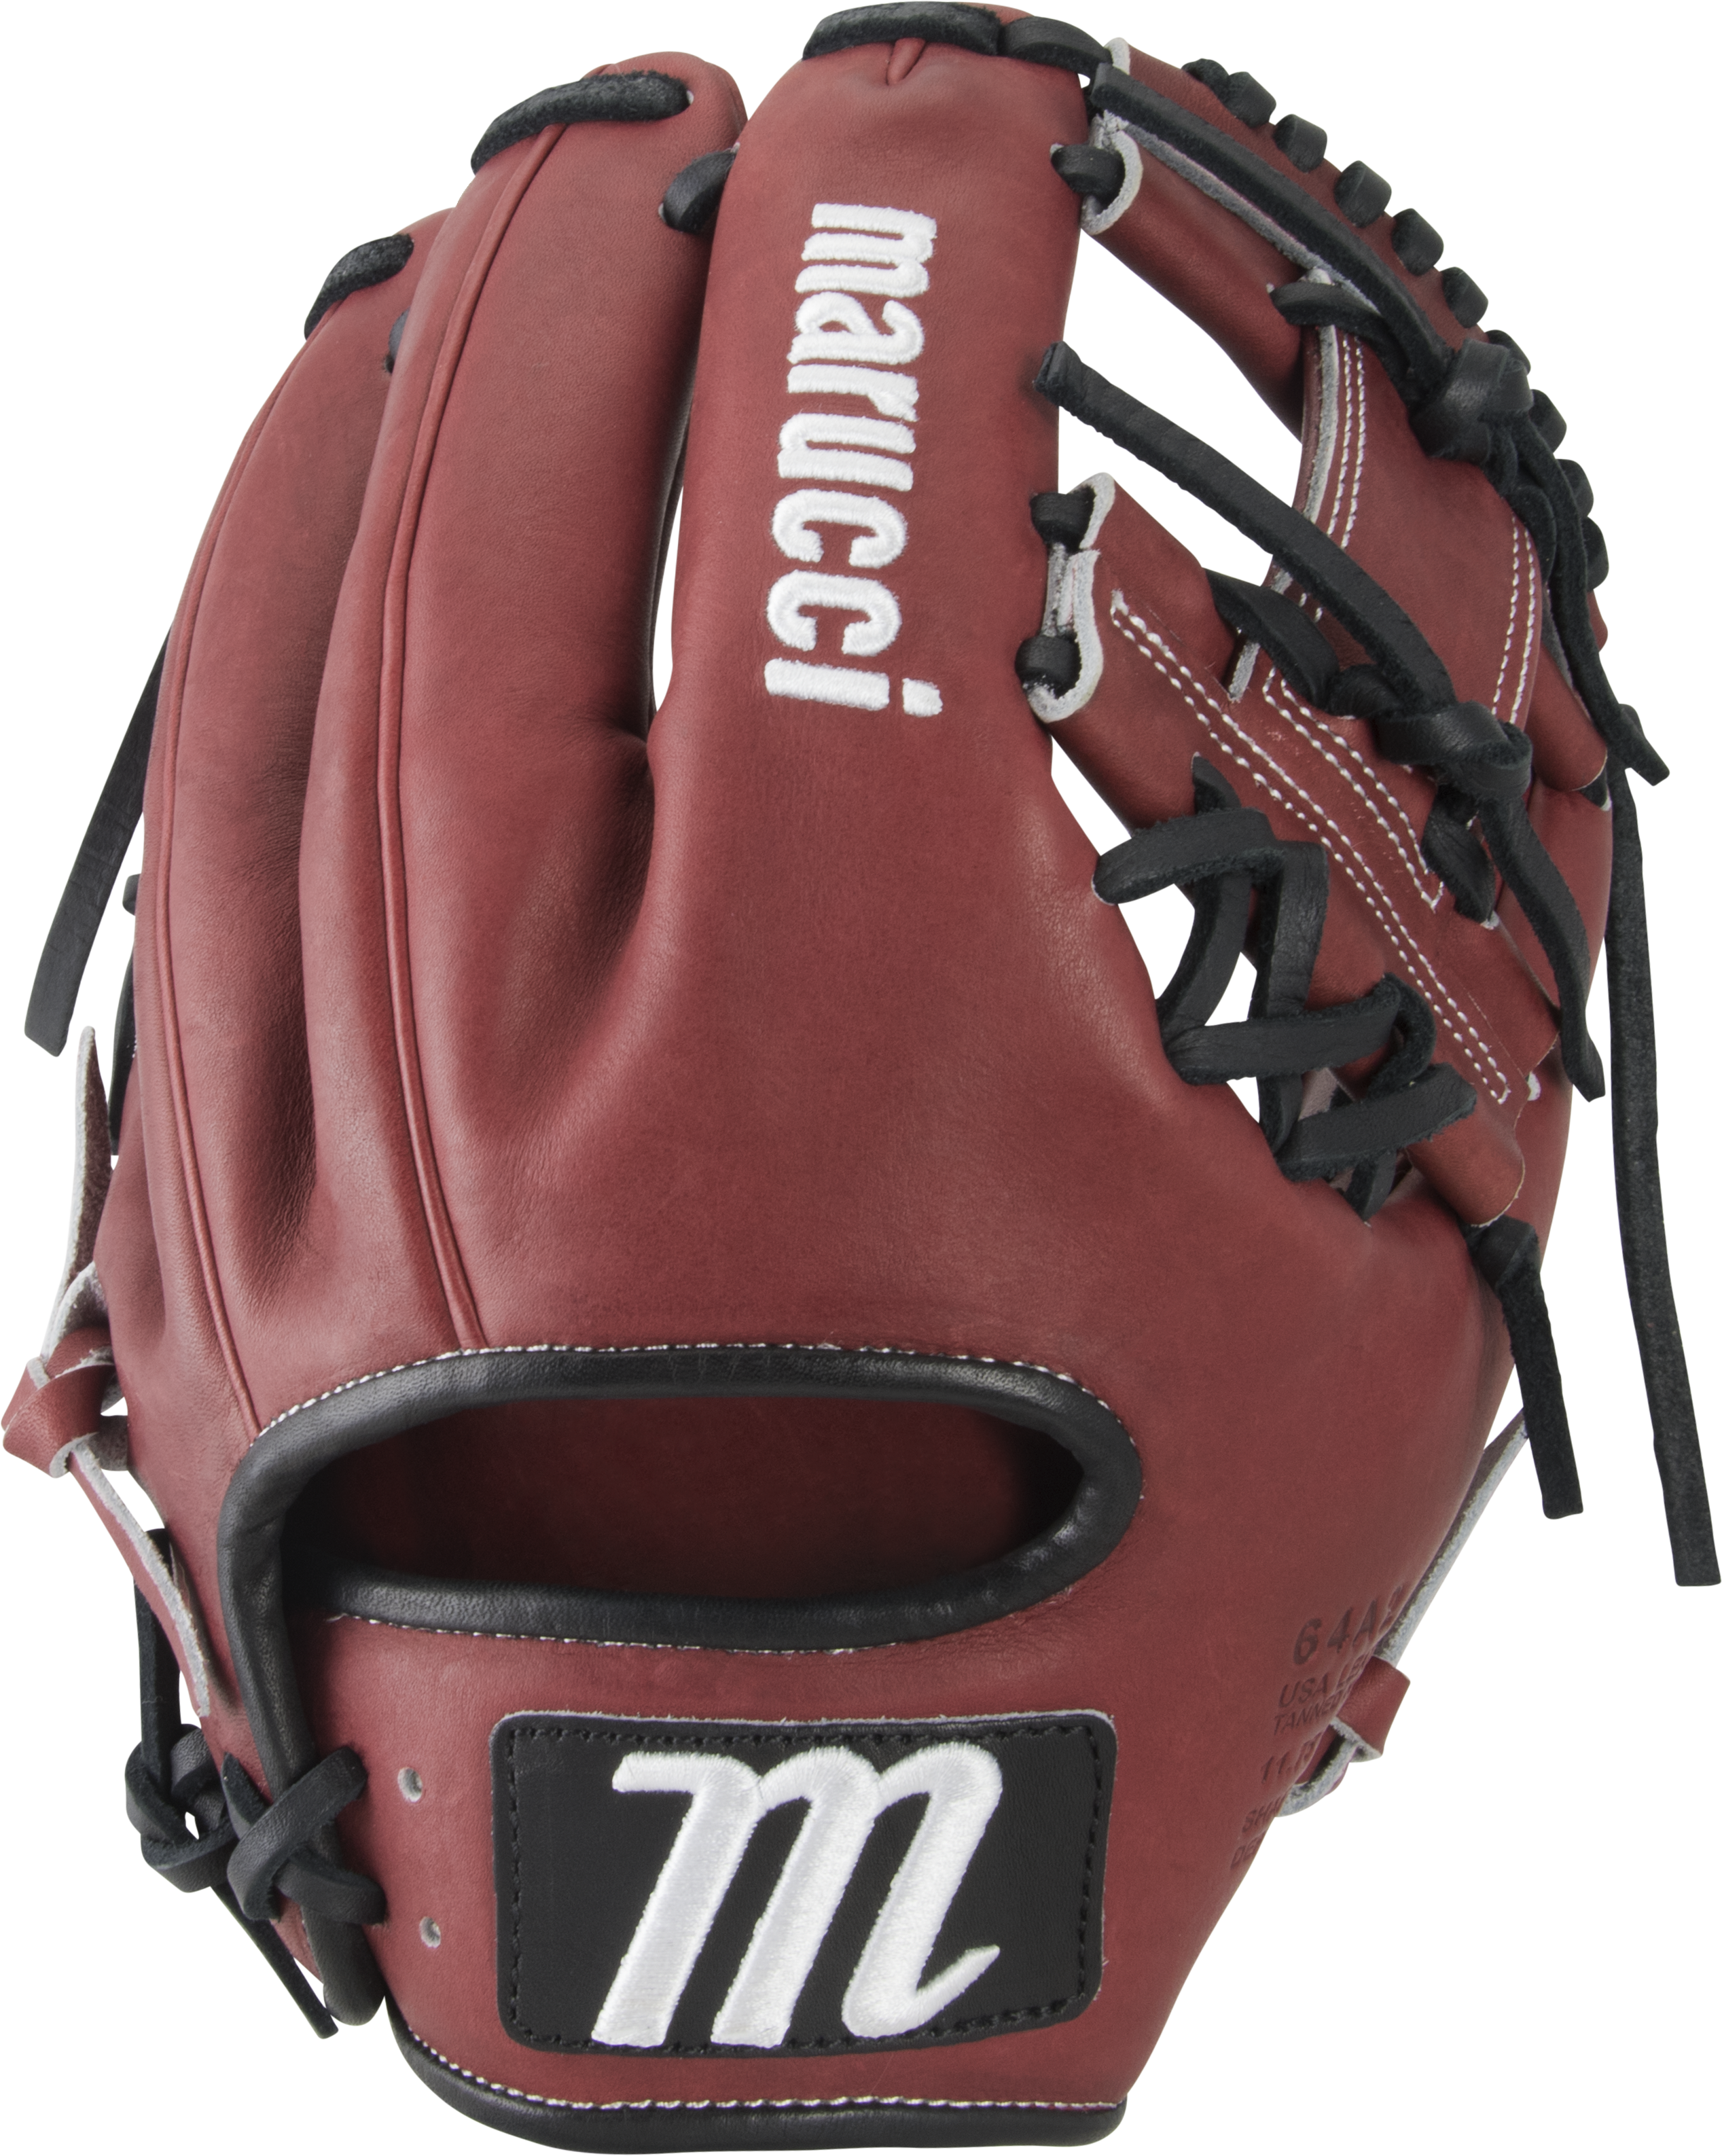 marucci-capitol-11-75-baseball-glove-64a2-single-i-web-right-hand-throw MFGCP64A2-WNBK-RightHandThrow Marucci  849817099216 Premium Japanese-tanned USA Kip leather combines ideal stiffness with lightweight feel